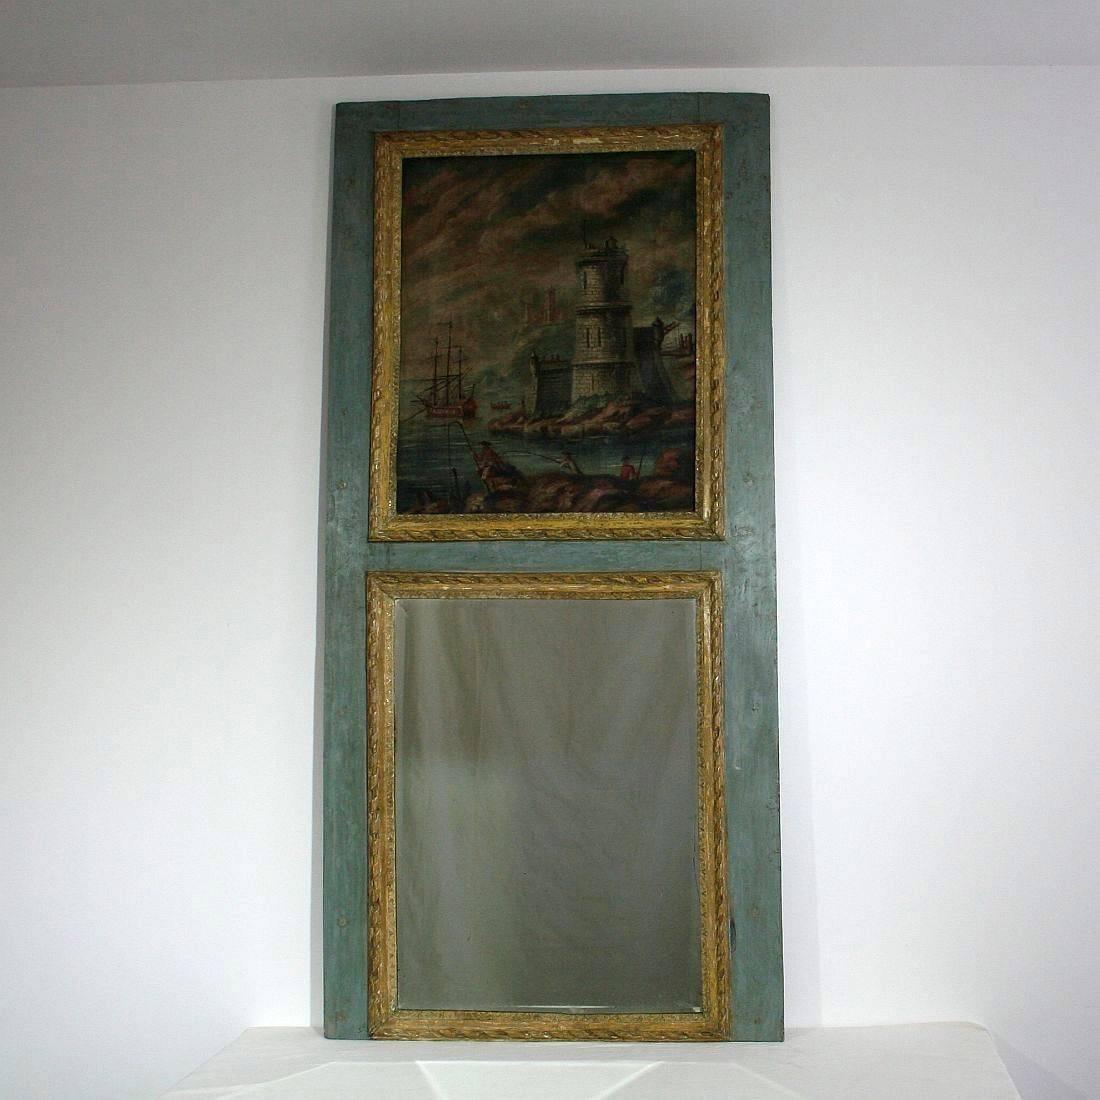 Original period piece with beautiful Folk Art painting. Original scraped paint and original mirror glass.. Rare item. France, circa 1750
Despite of it's age in a good condition
More pictures are available on request.